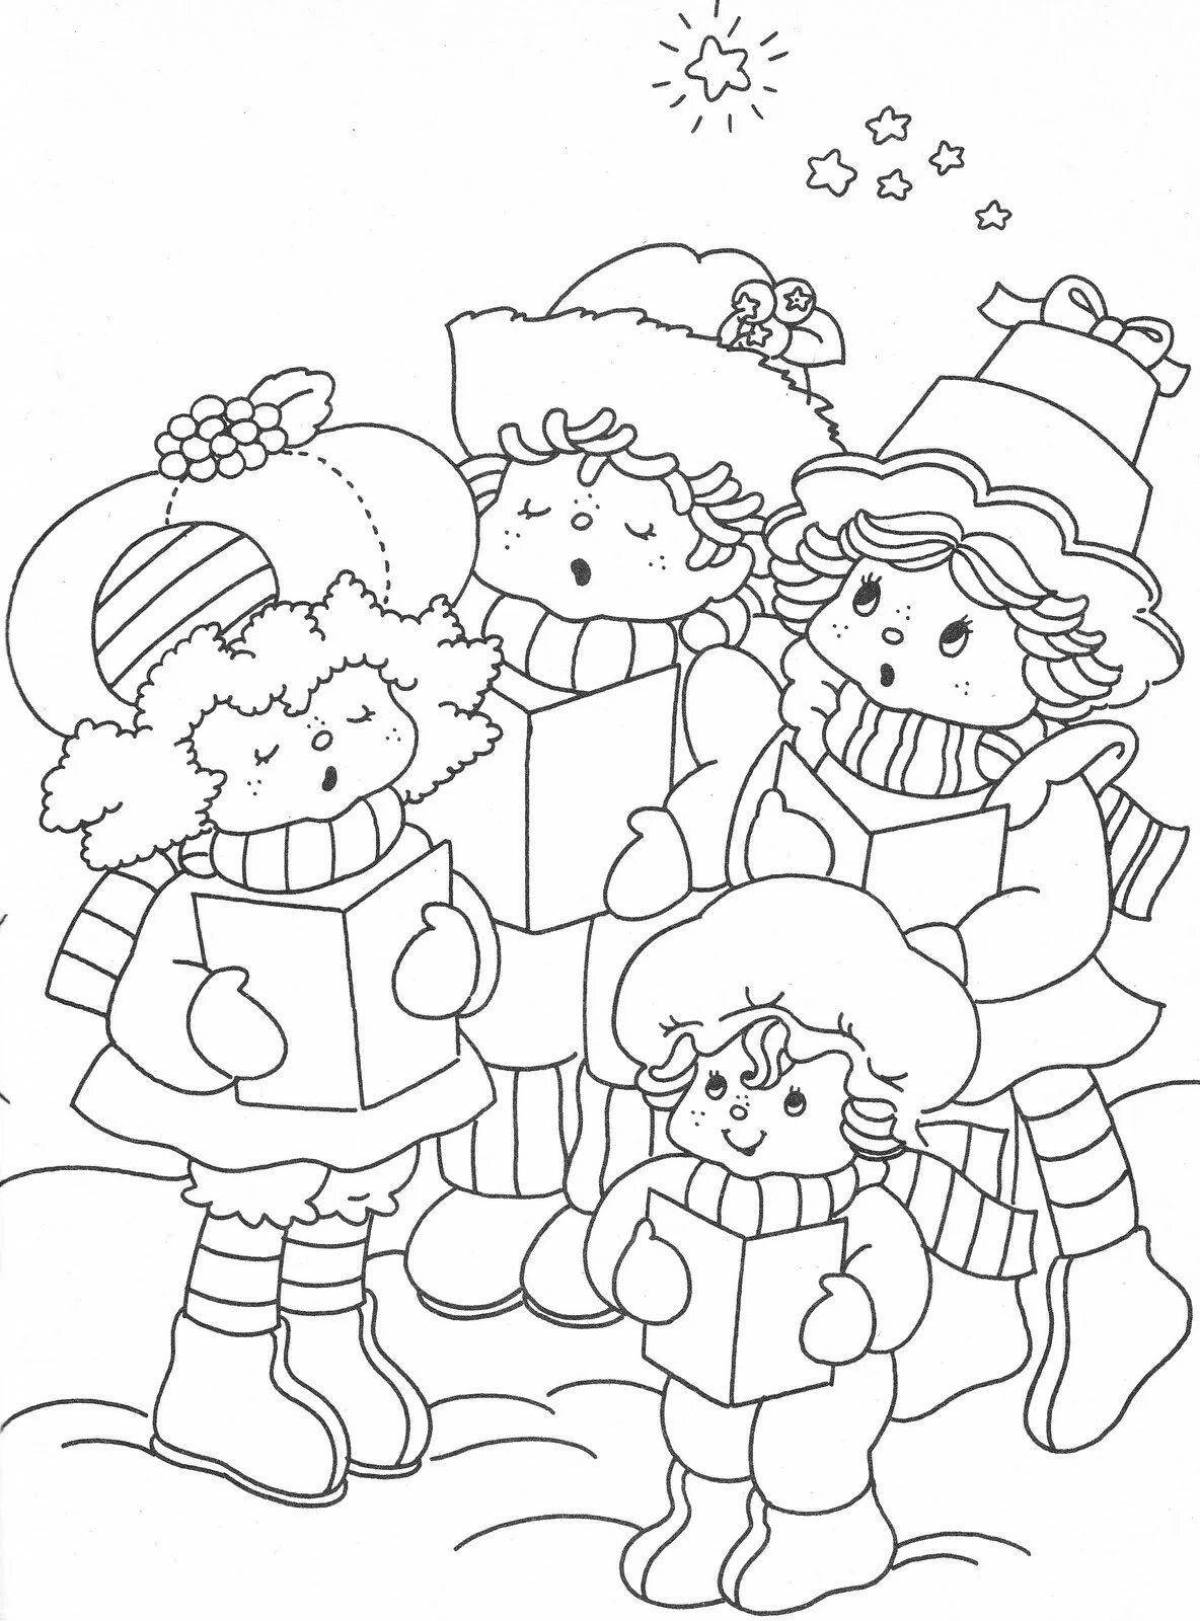 Inspirational Christmas carol coloring pages for kids